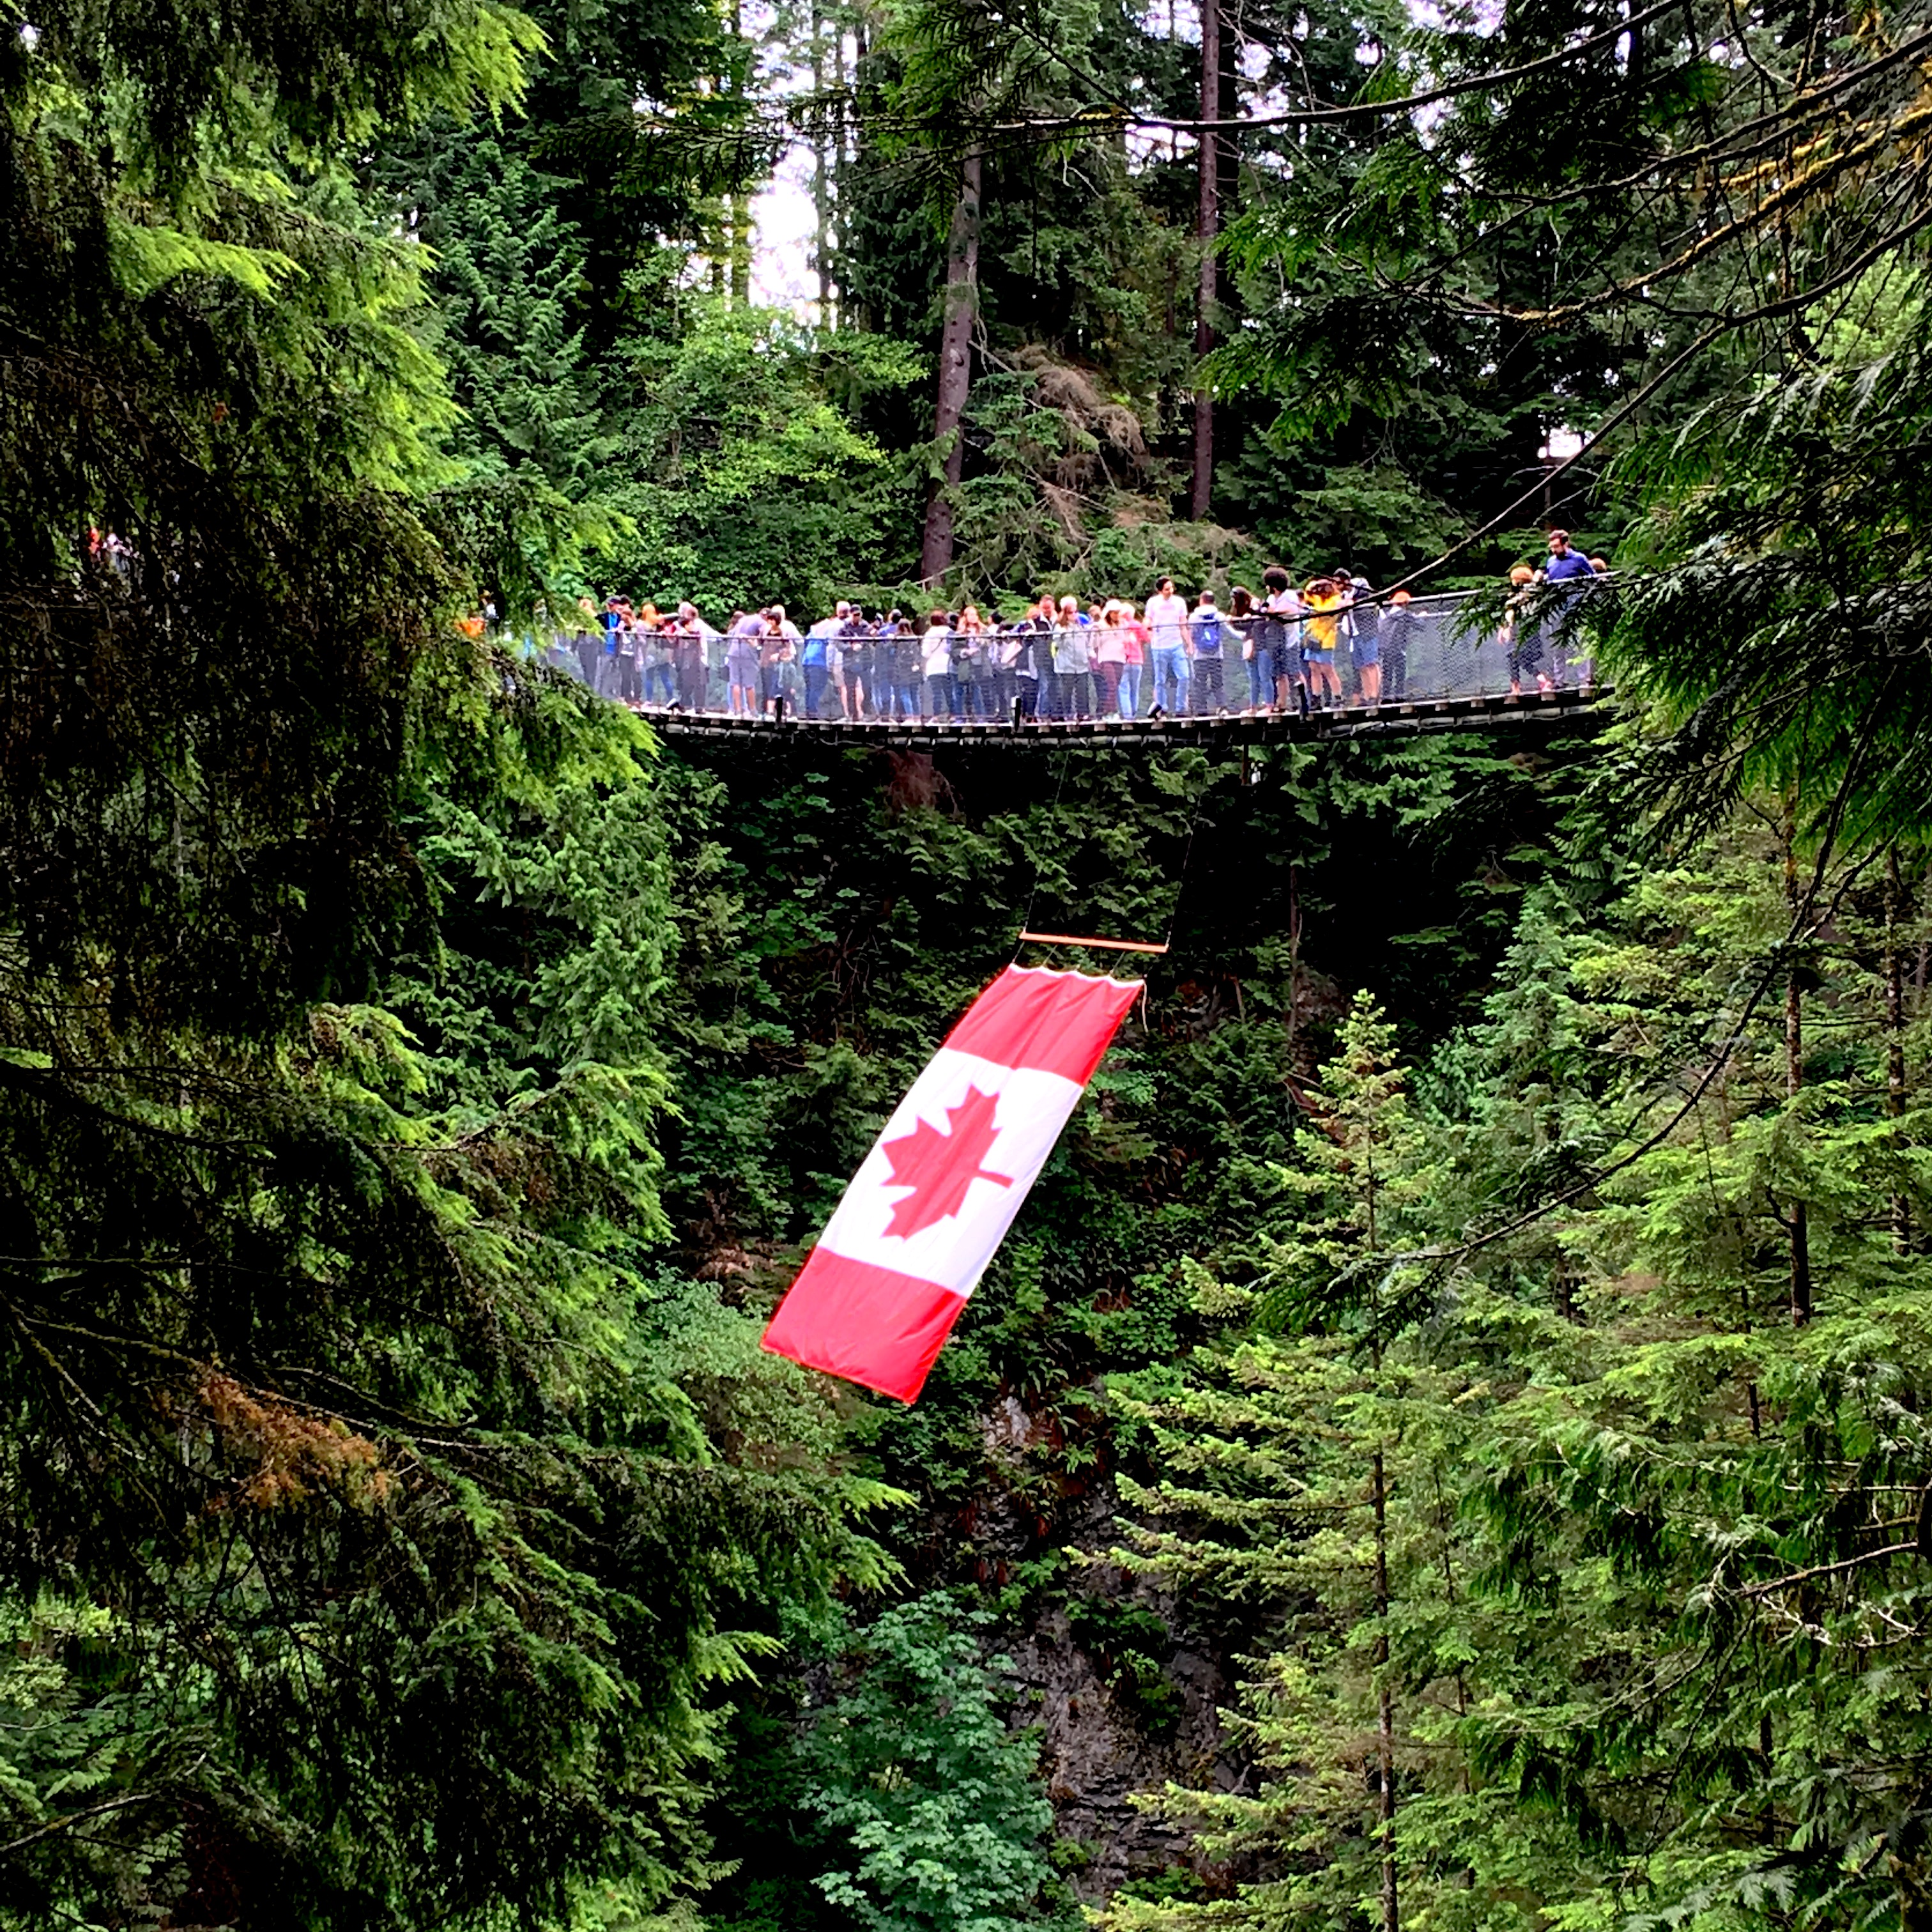 This bridge once took the impact of a 46-ton, 300-year-old Douglas fir tree and survived.